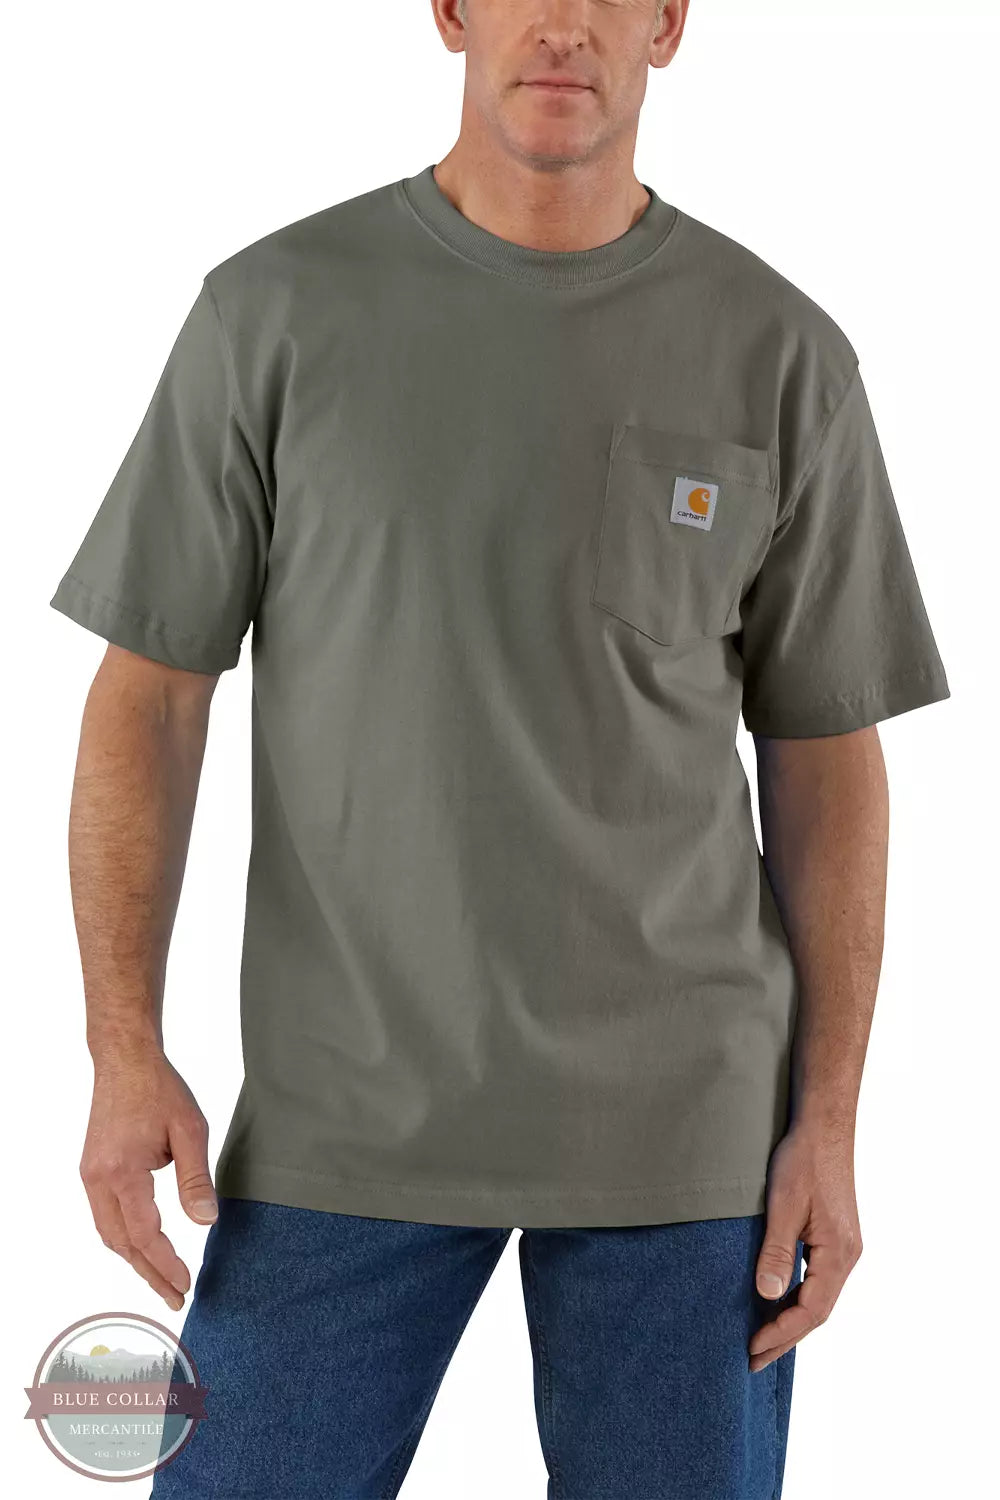 Carhartt K87 Loose Fit Heavyweight Short Sleeve Pocket T-Shirt Basic Colors Dusty Olive Front View